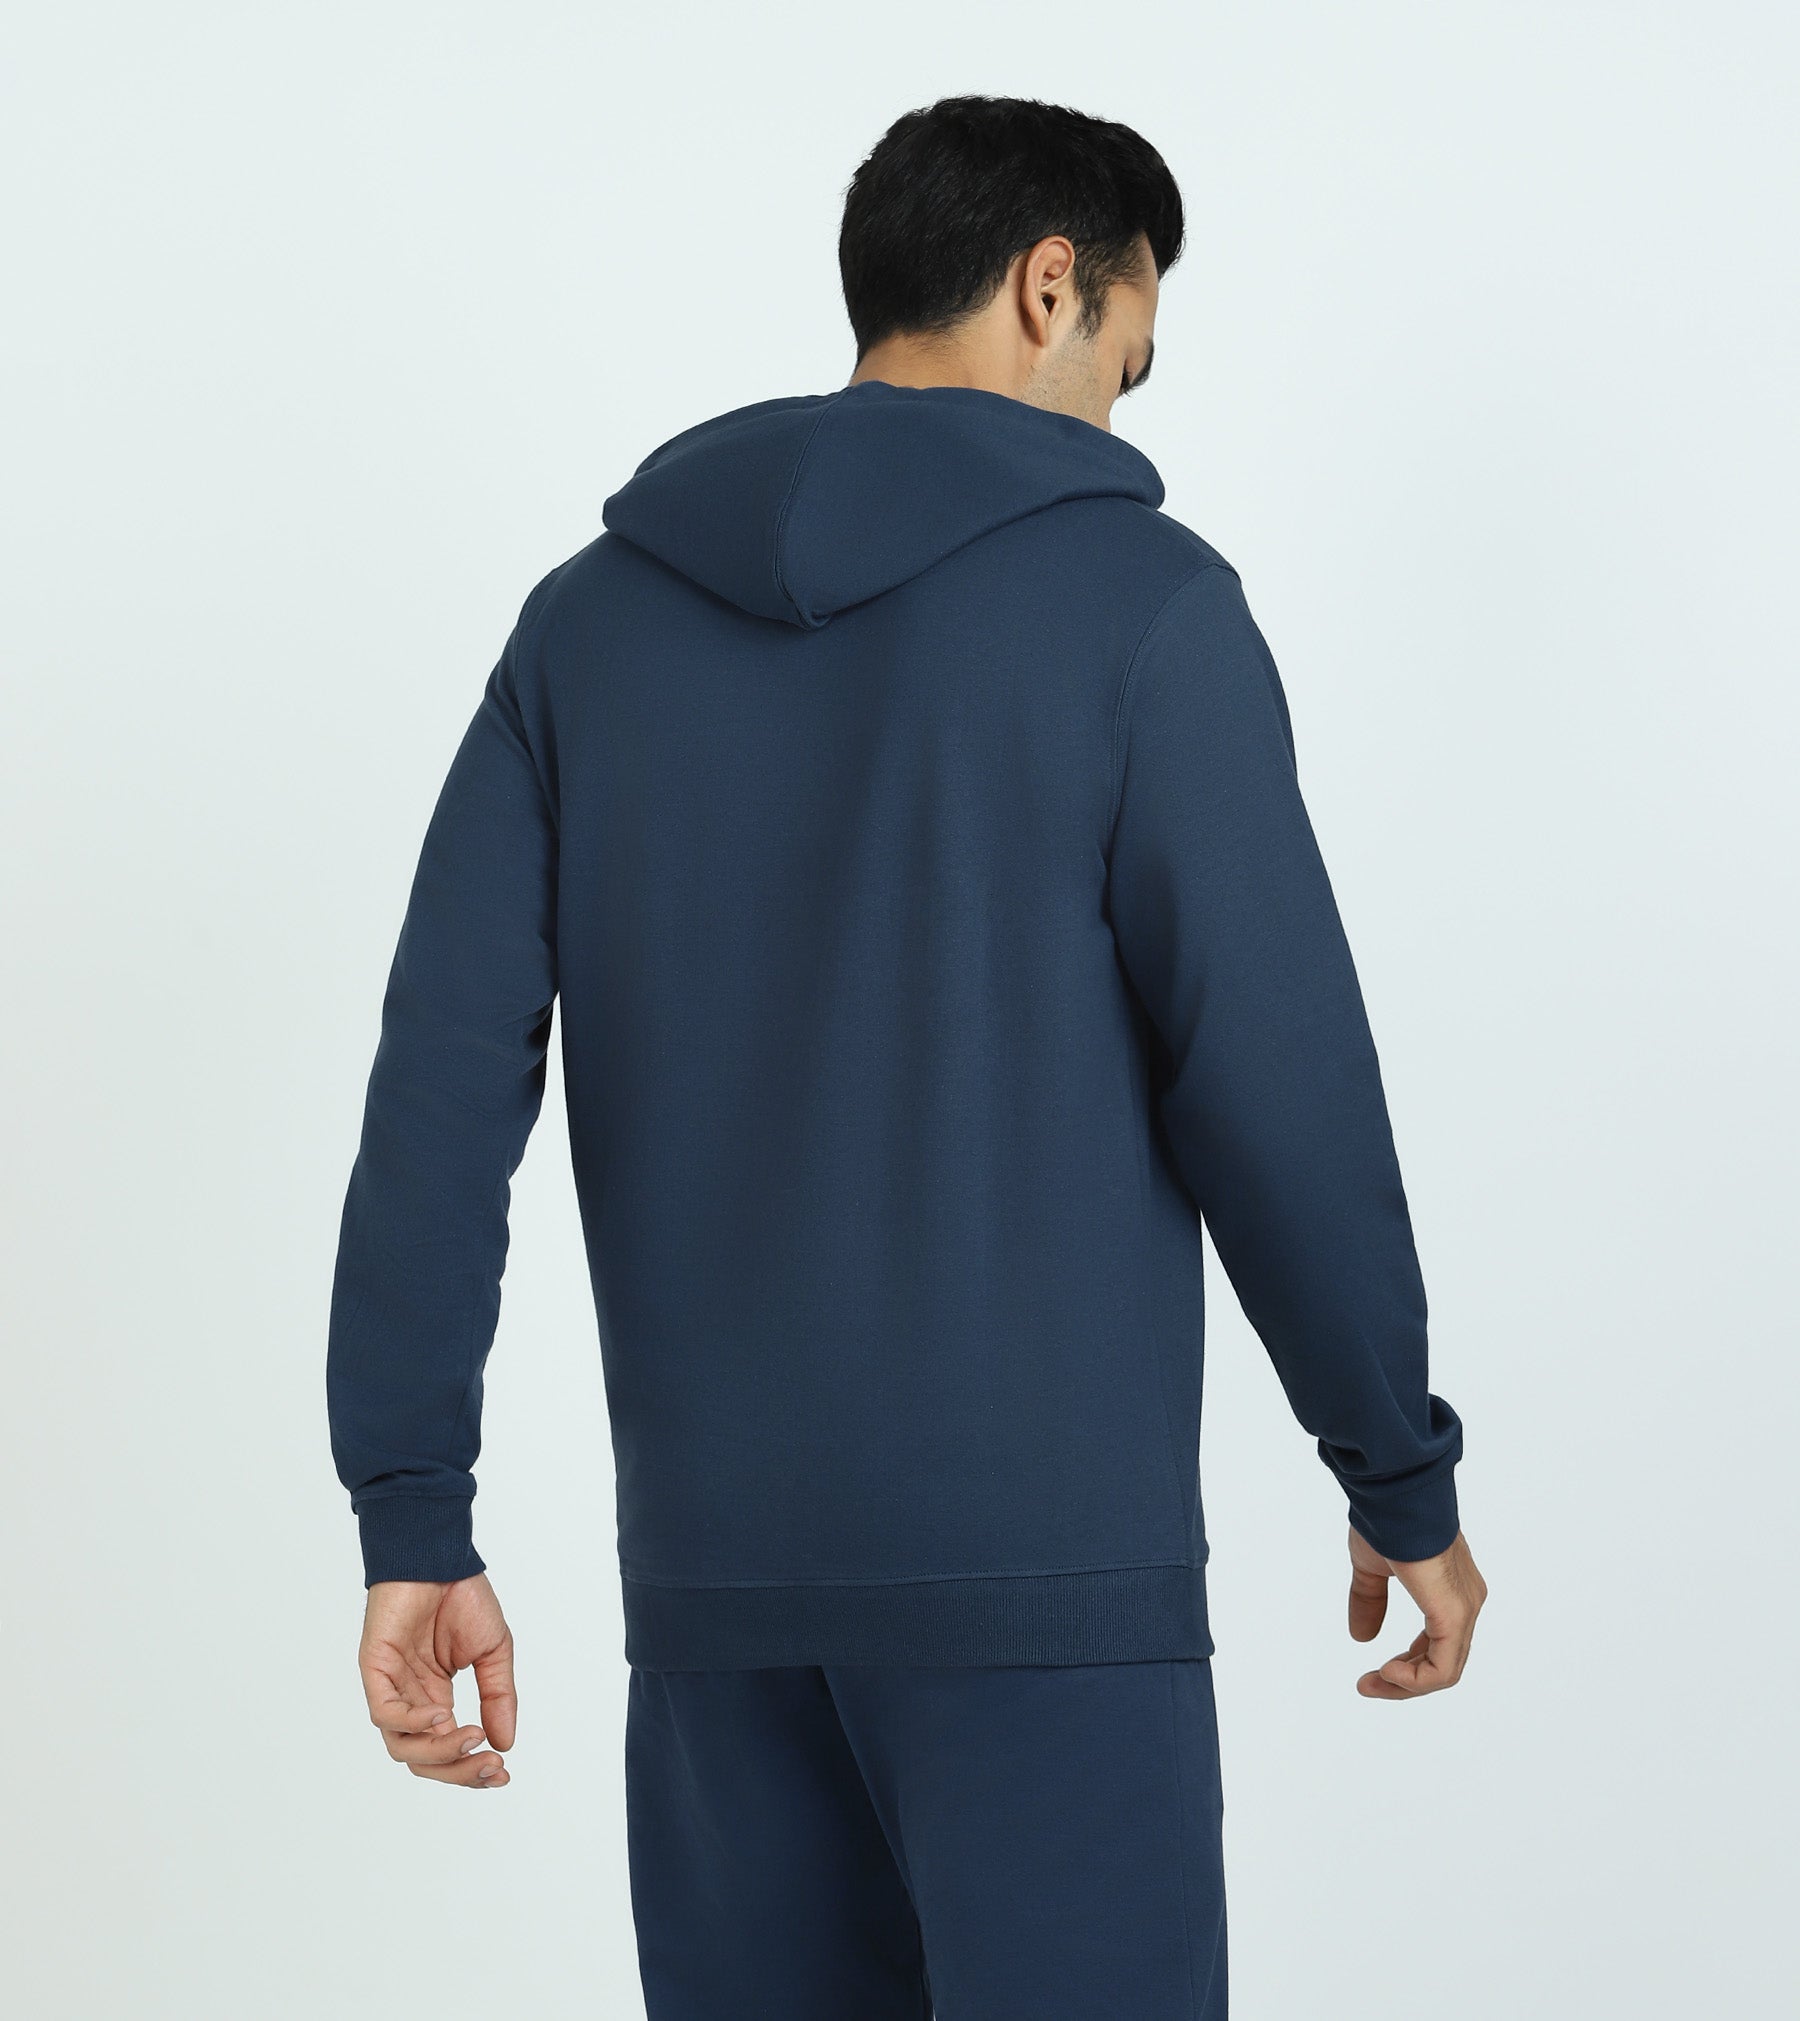 Cruze French Terry Cotton Hoodies Set For Men Opal Blue - XYXX Mens Apparels